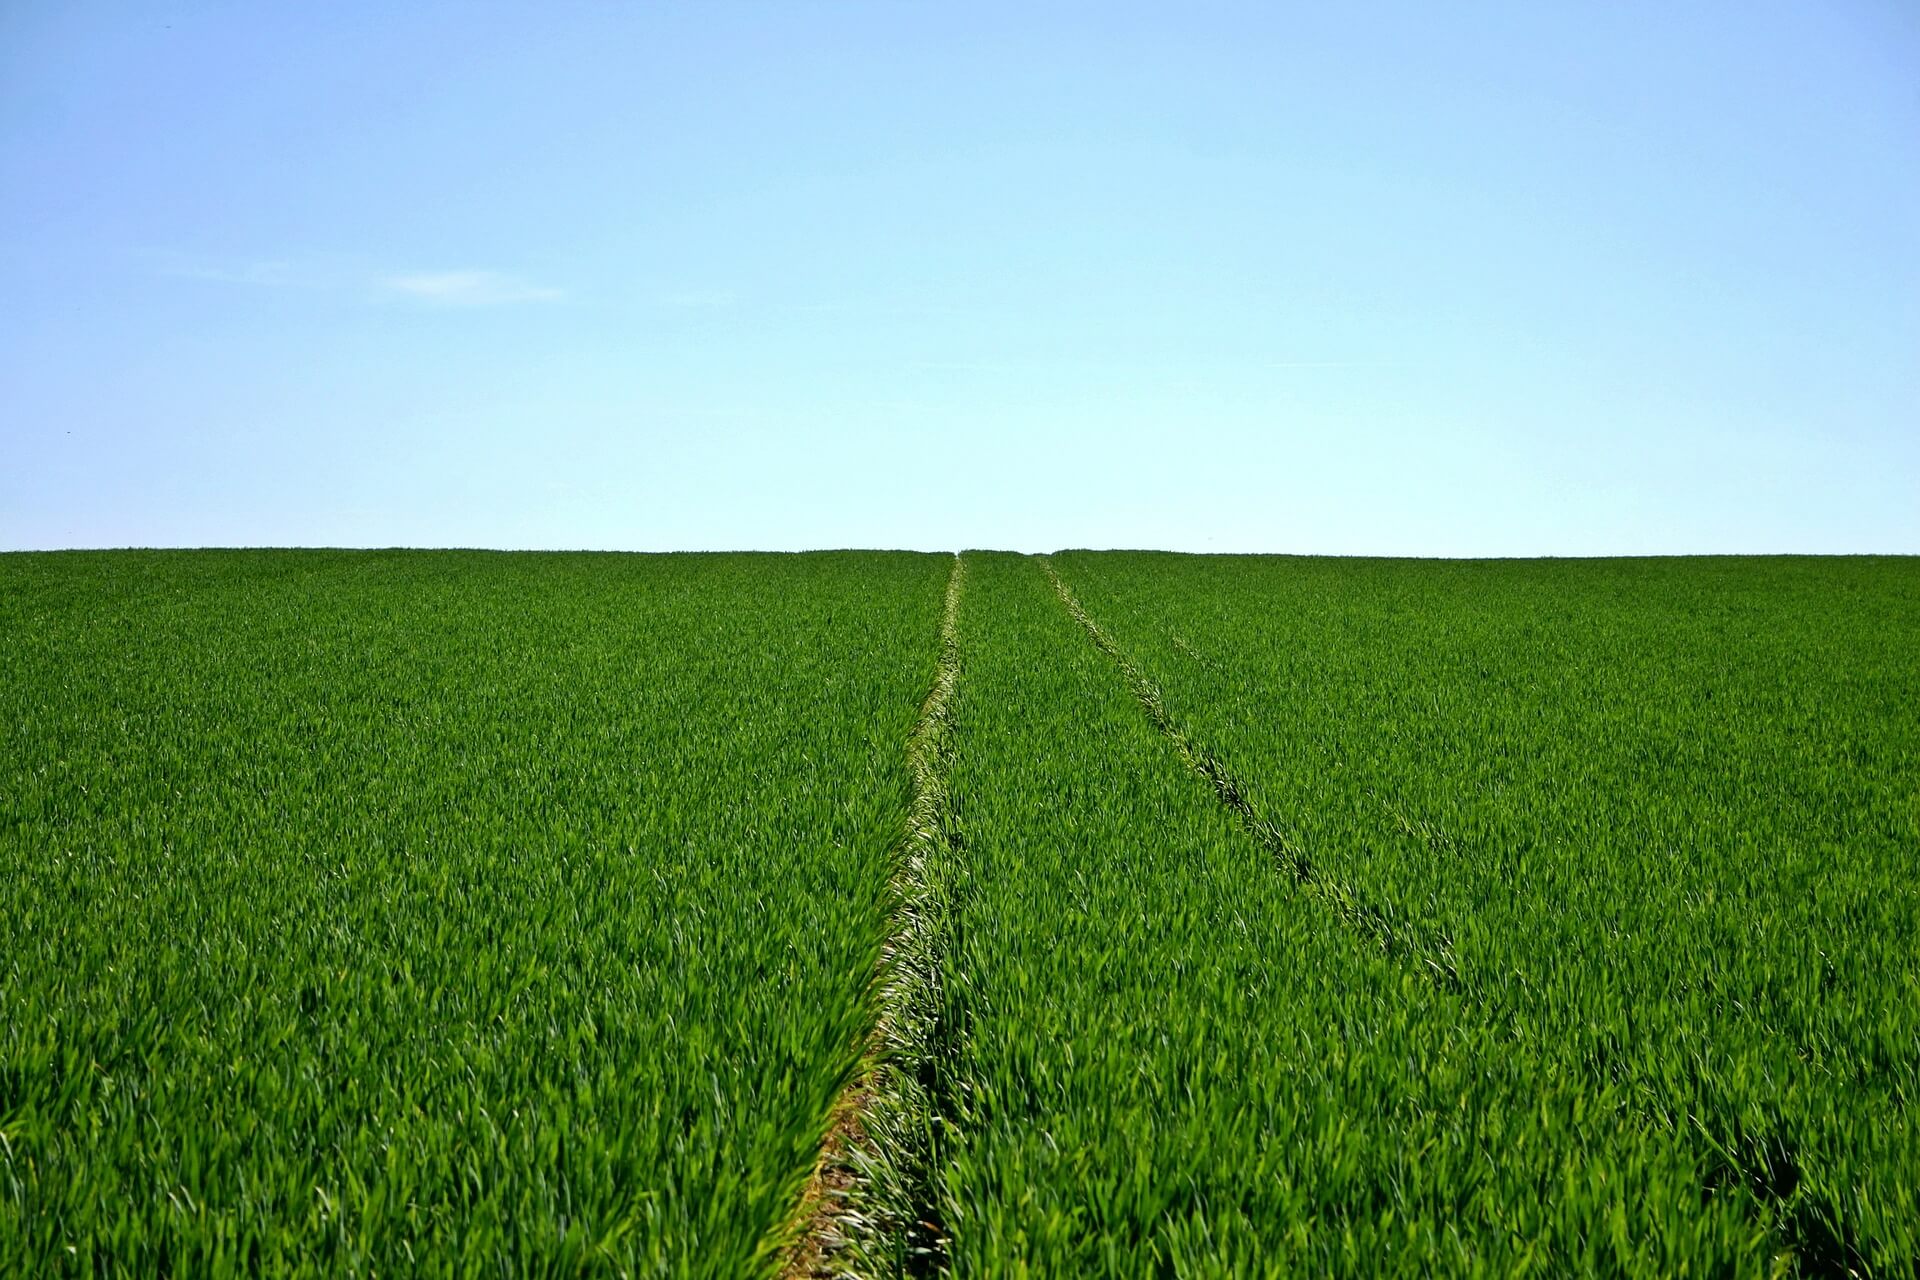 A cereal field, with plentiful crops.